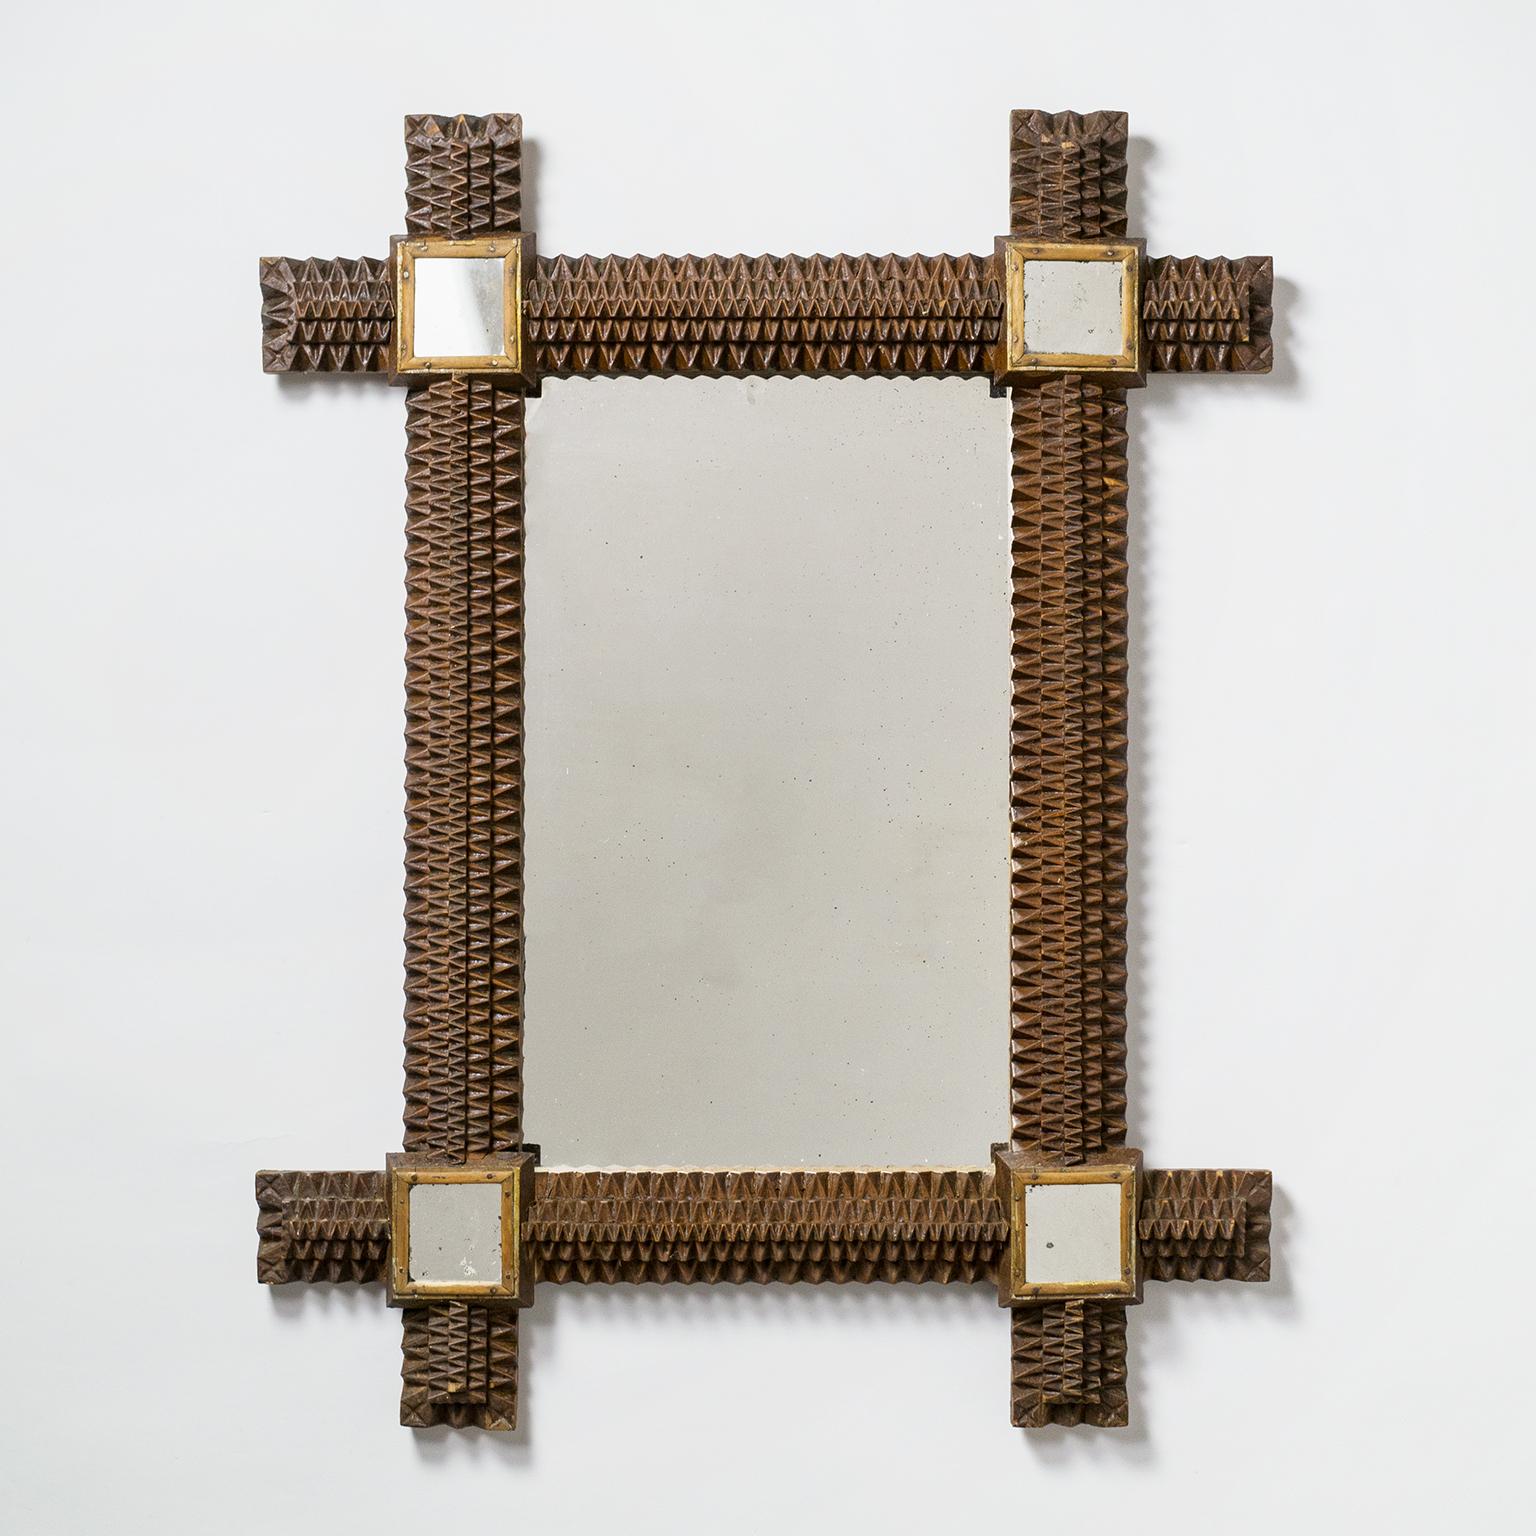 Very fine Art Deco mirror with intricate geometric woodwork. On the top left of the backside it is signed and dated 